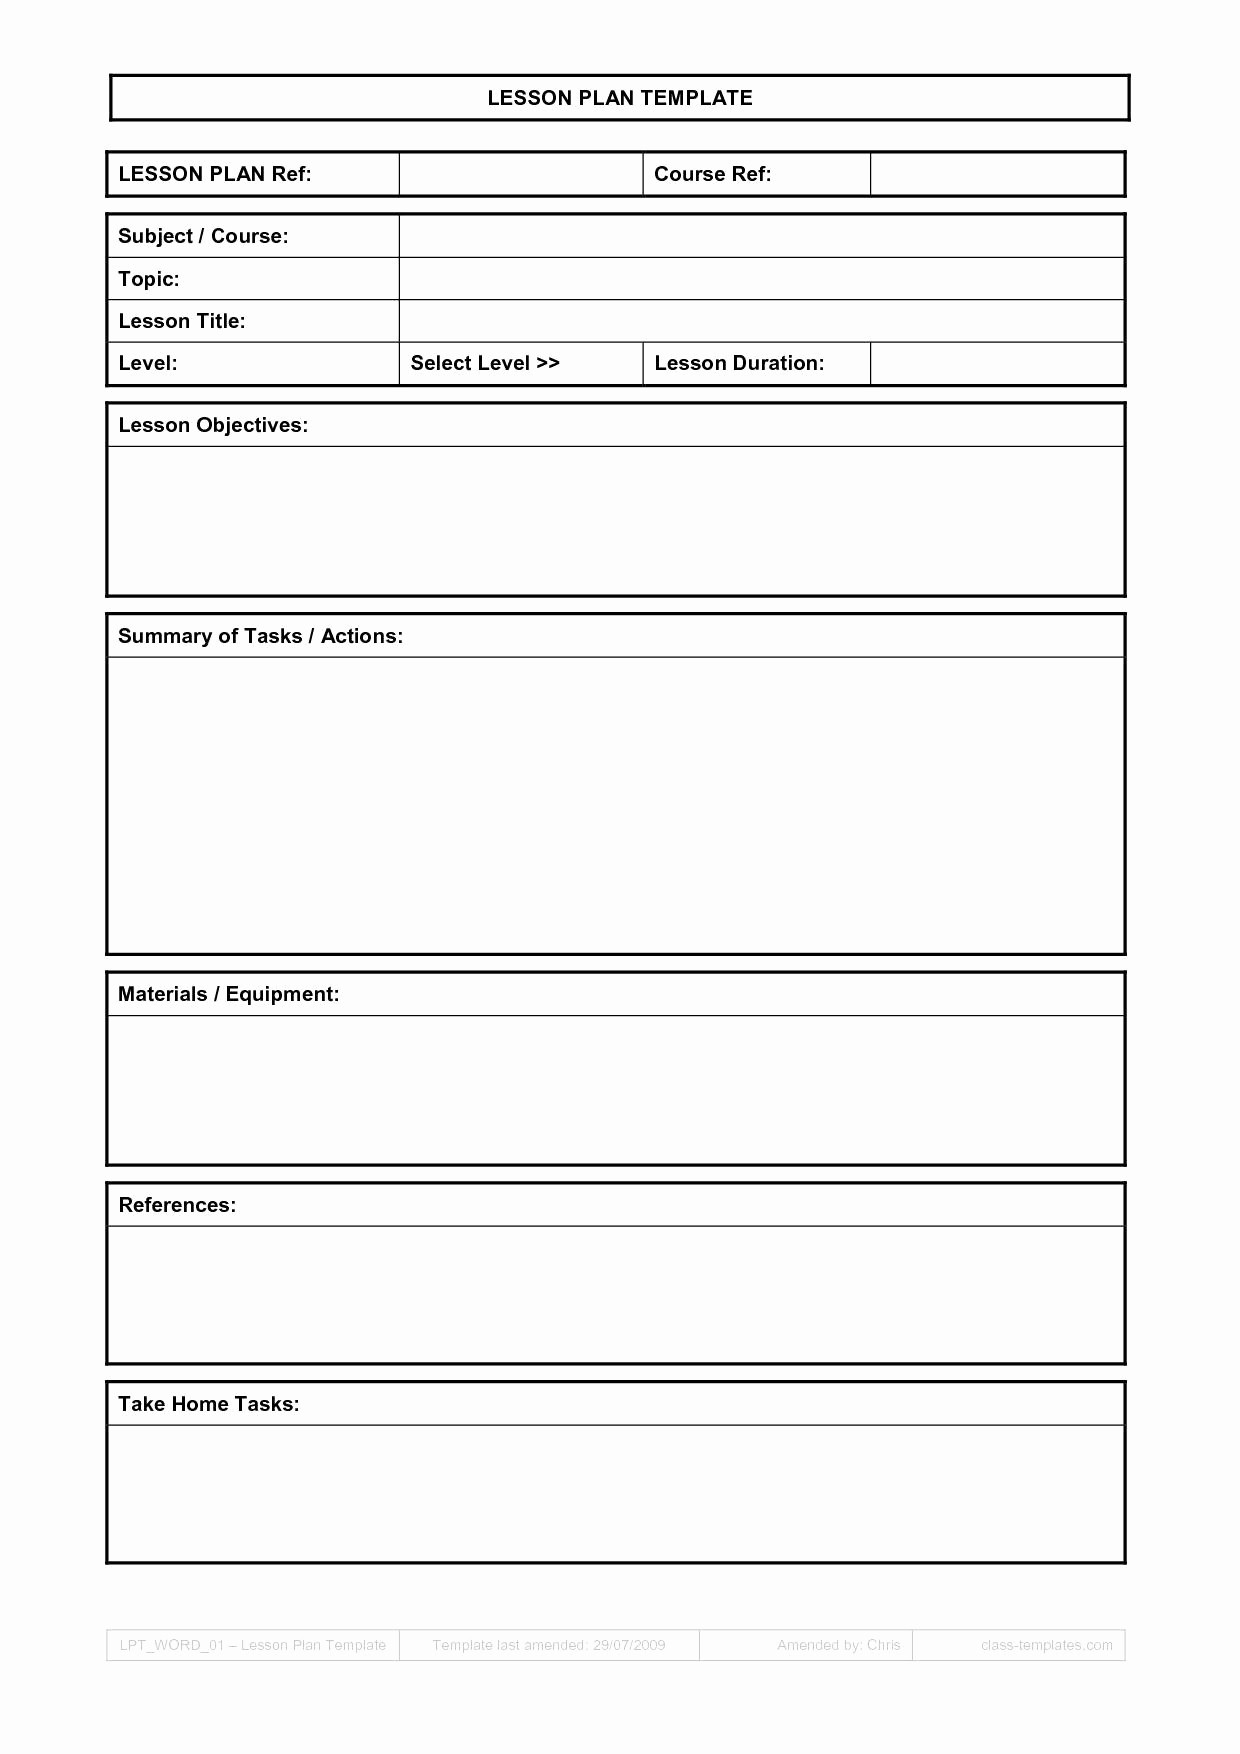 Lesson Plan Template Google Docs 1340691080117 Weekly Document Business Plans Templates